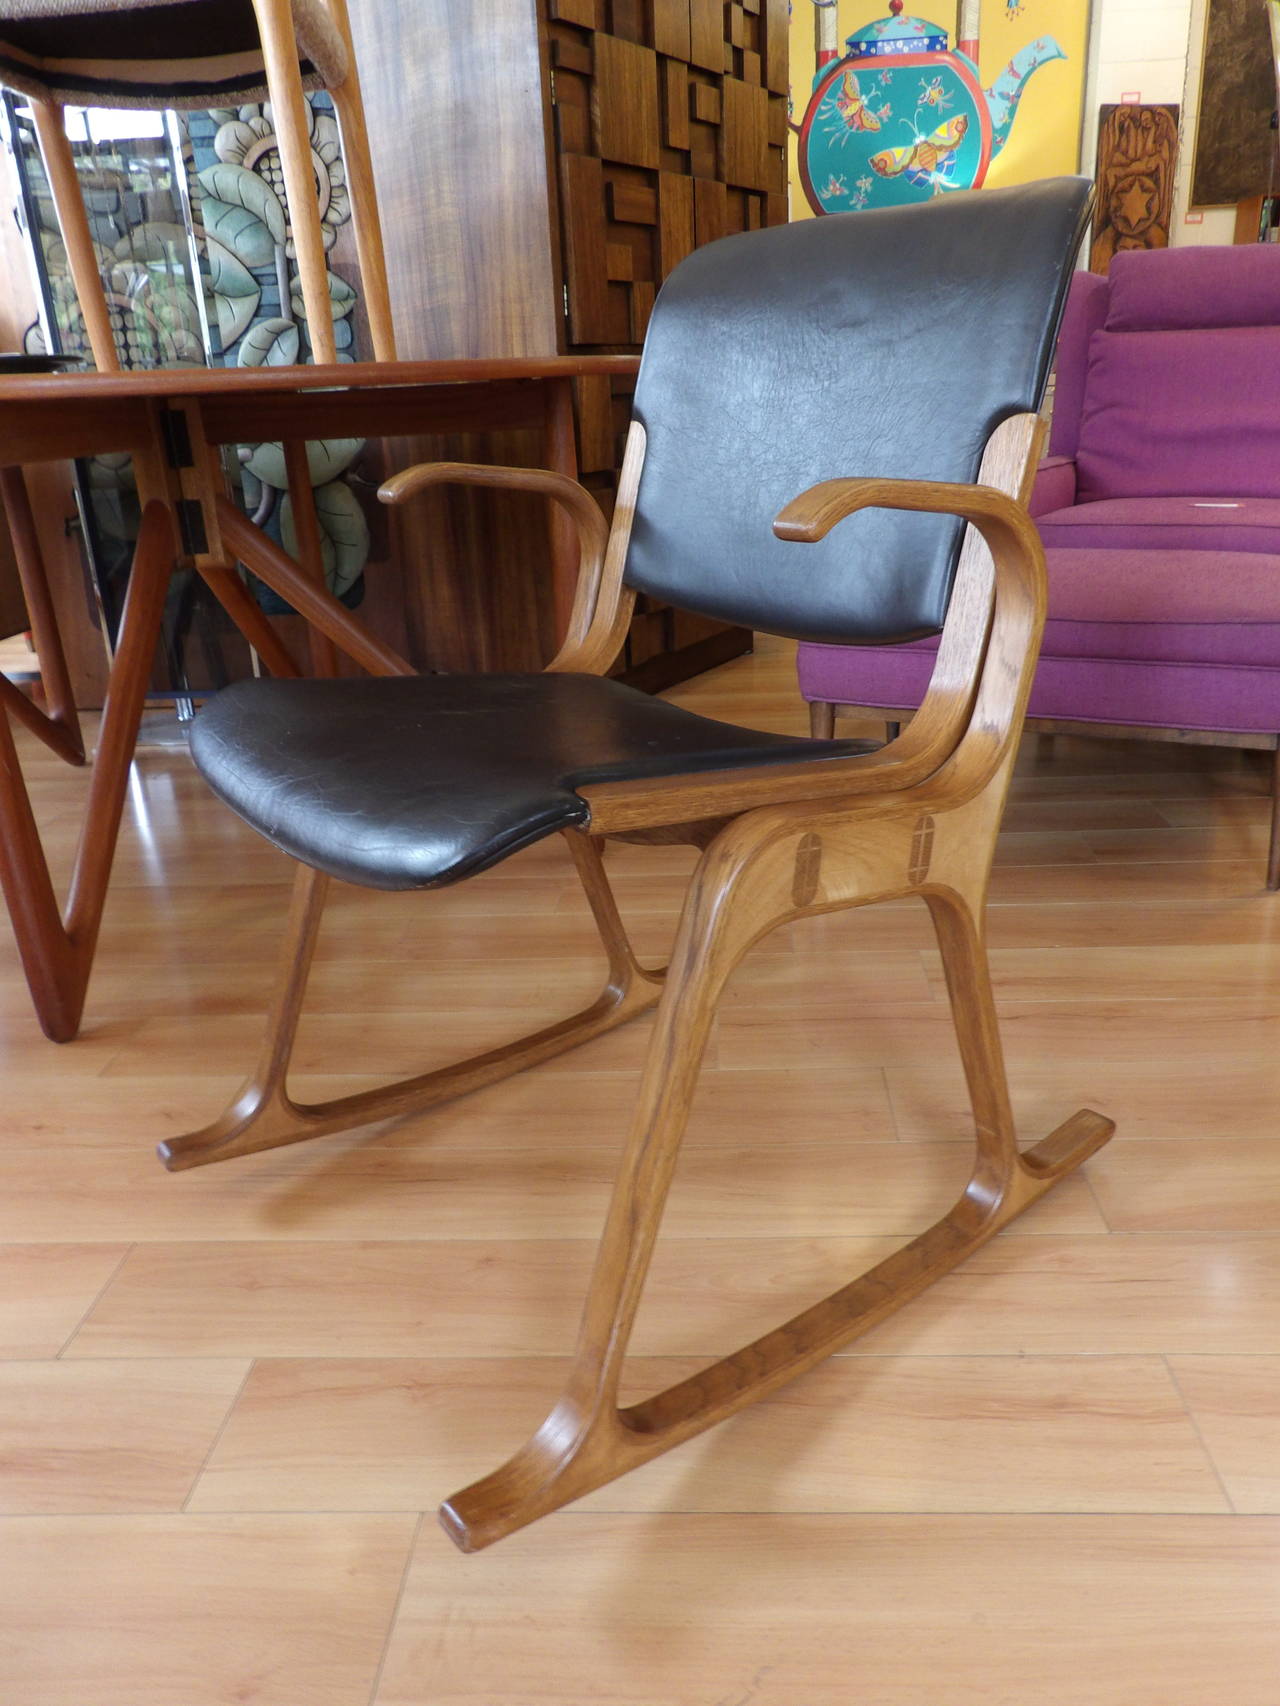 Unique steamed wood and leather Mid-Century Modern rocker created in the style of Mitsumasa Sugasawa. Fine detail to joined wood, leather upholstery. Unknown maker and designer.